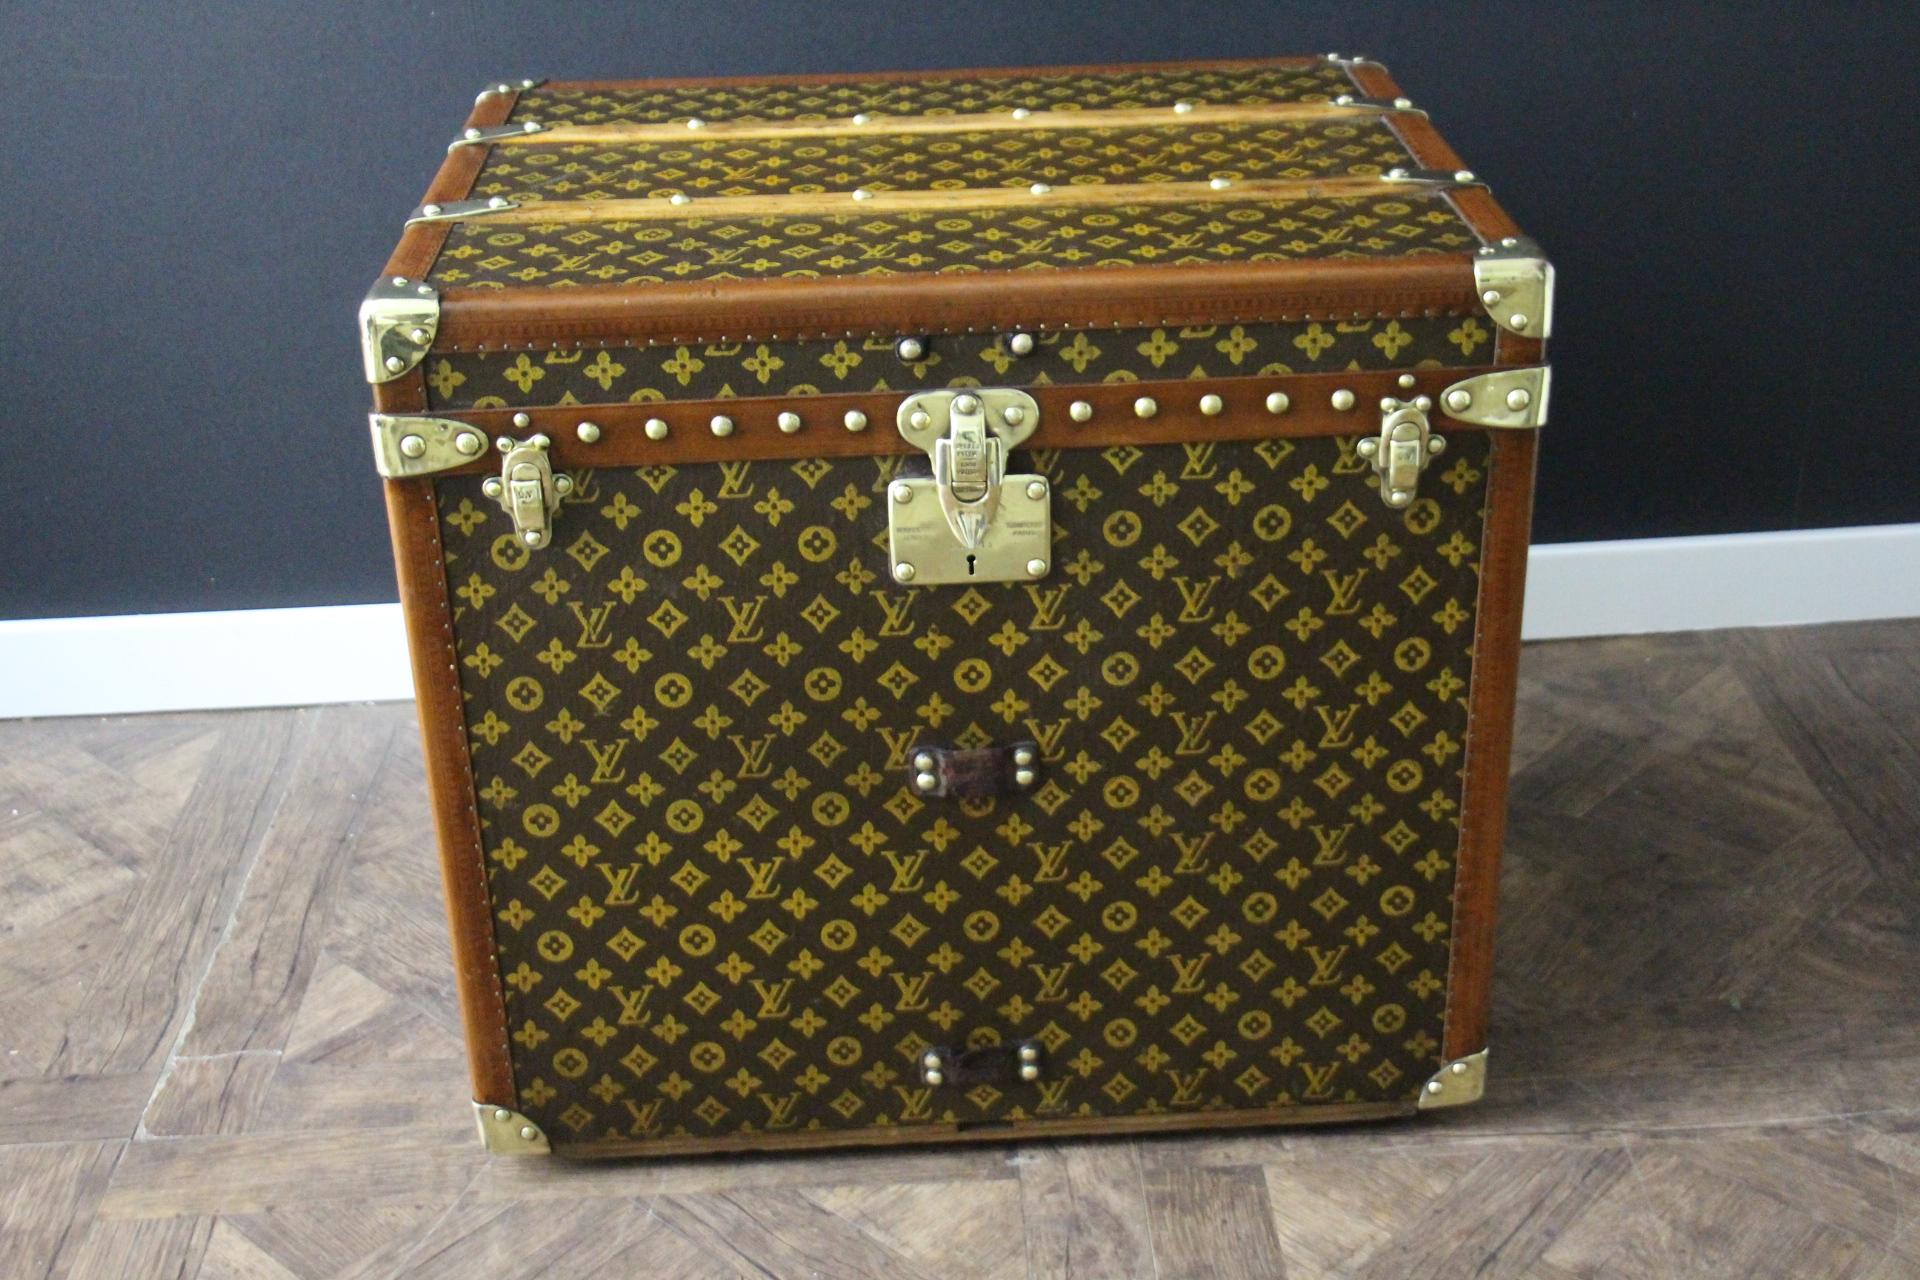 This beautiful and very rare Louis Vuitton trunk features hand painted stenciled monogram canvas, honey color lozine trim, large leather side handles, stamped Louis Vuitton brass studs, lock and clasps. It also features hand painted turquoise blue